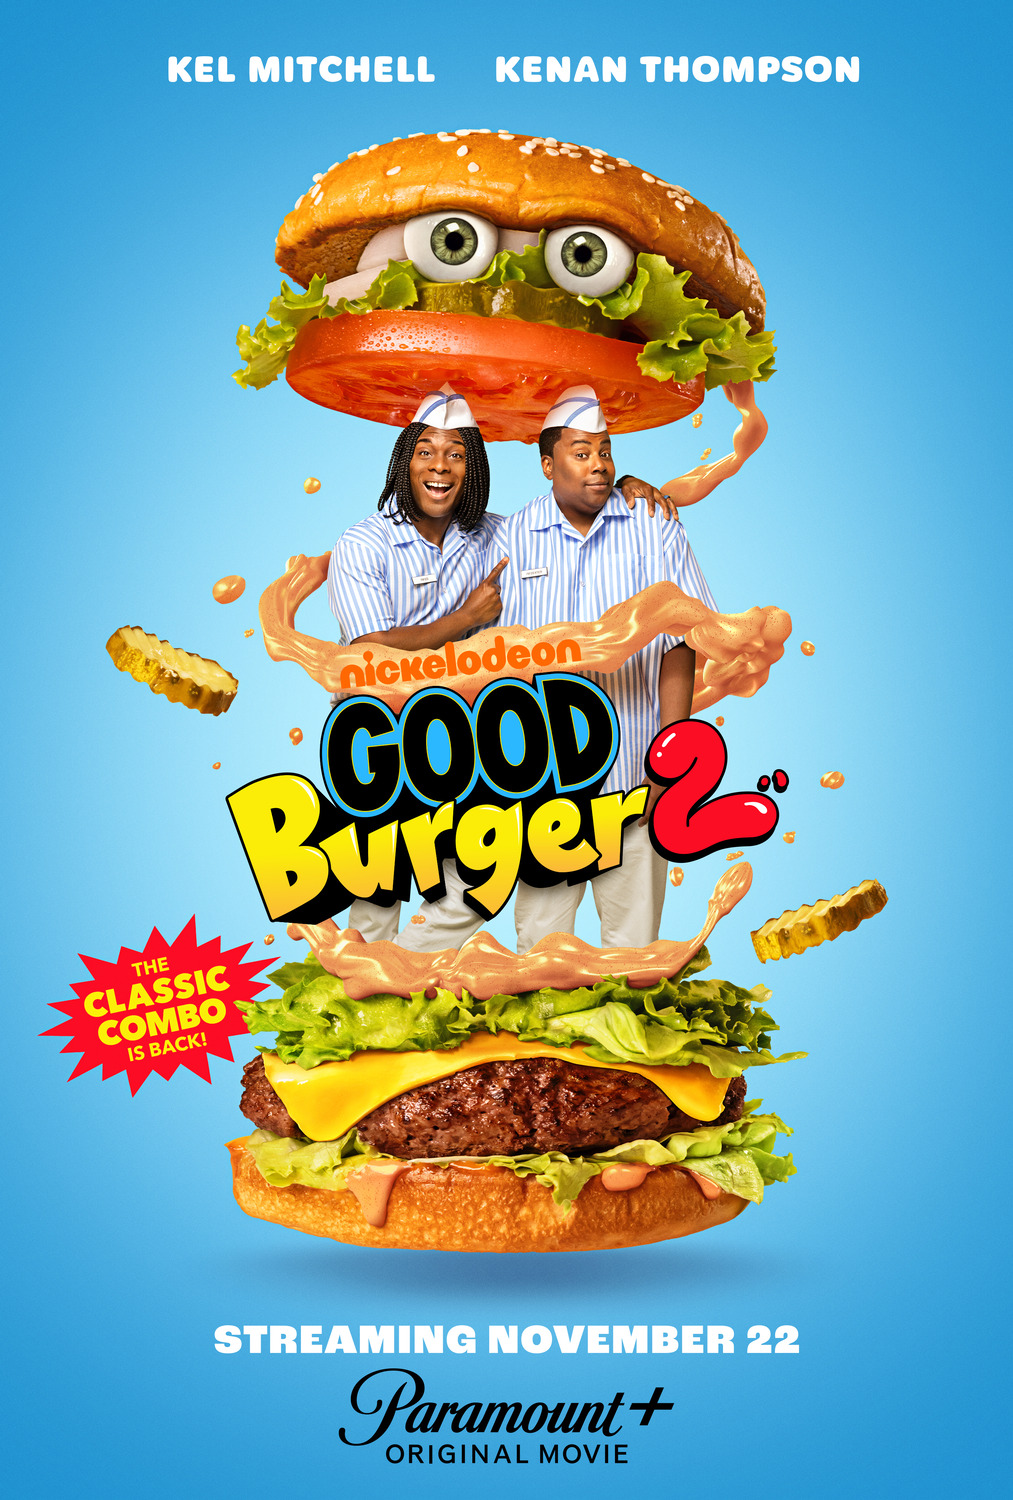 Extra Large Movie Poster Image for Good Burger 2 